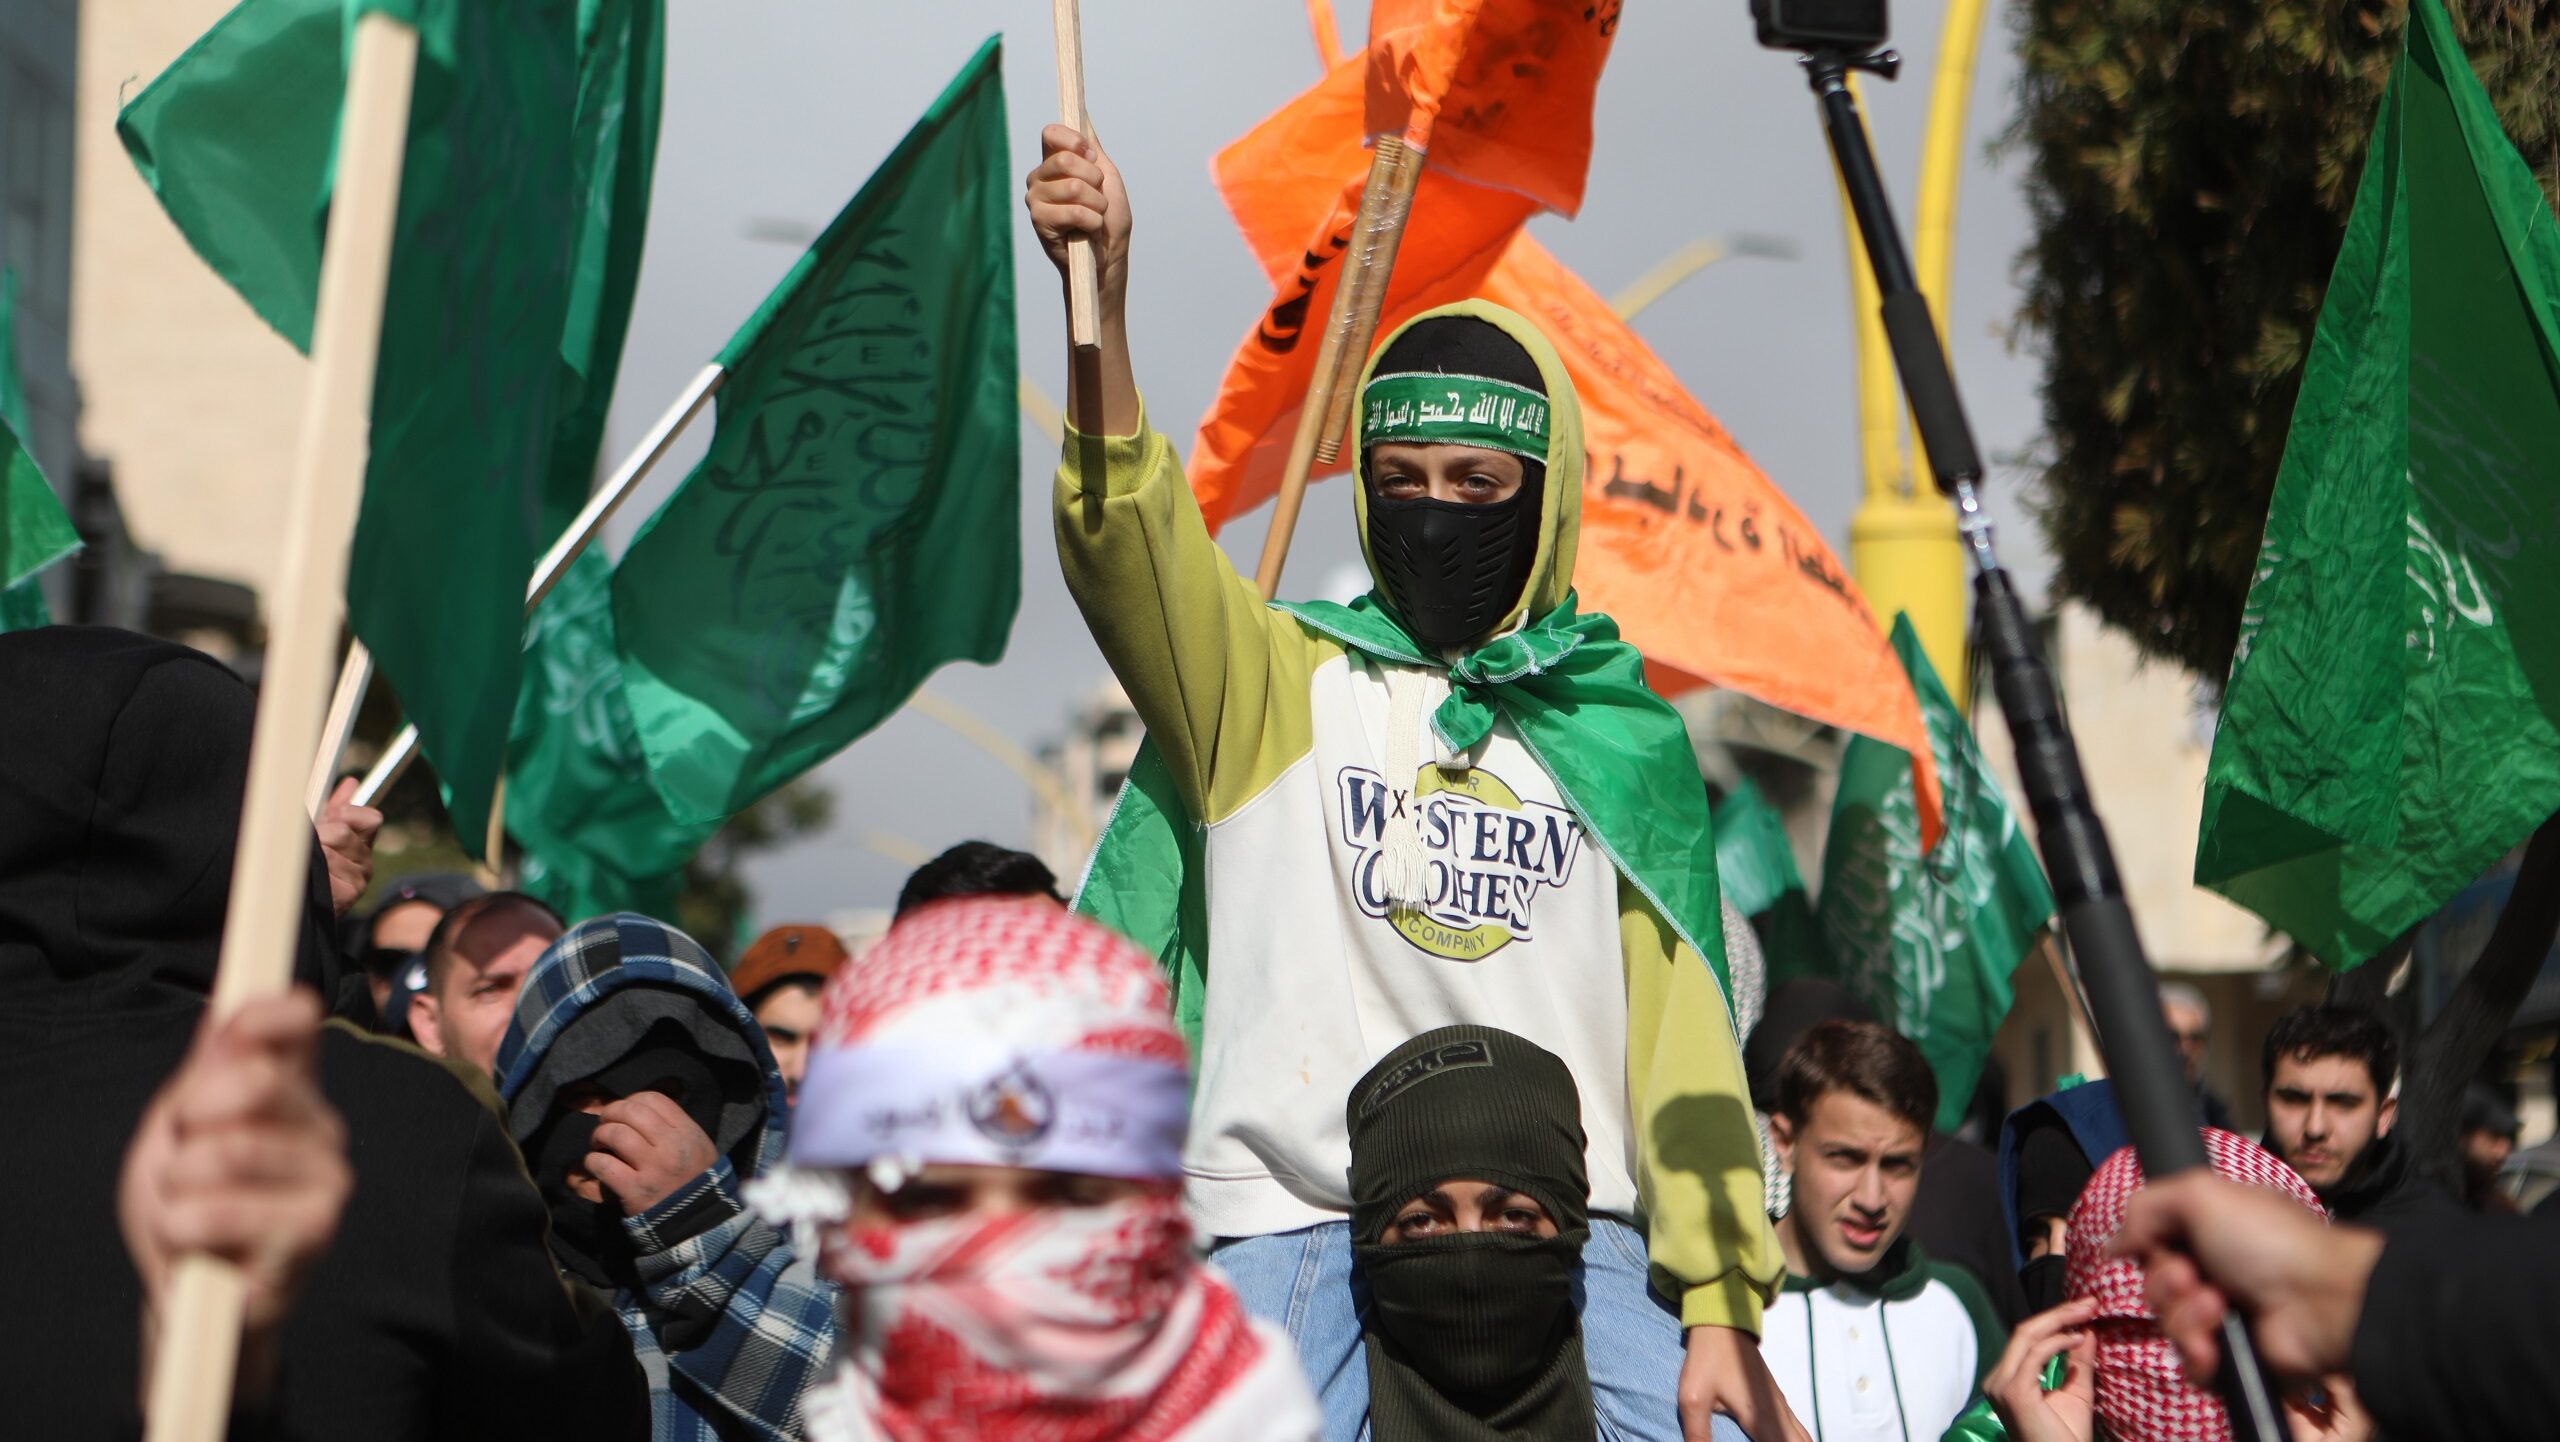 Hamas Still Operates in the West Bank. What is Israel Doing About It?